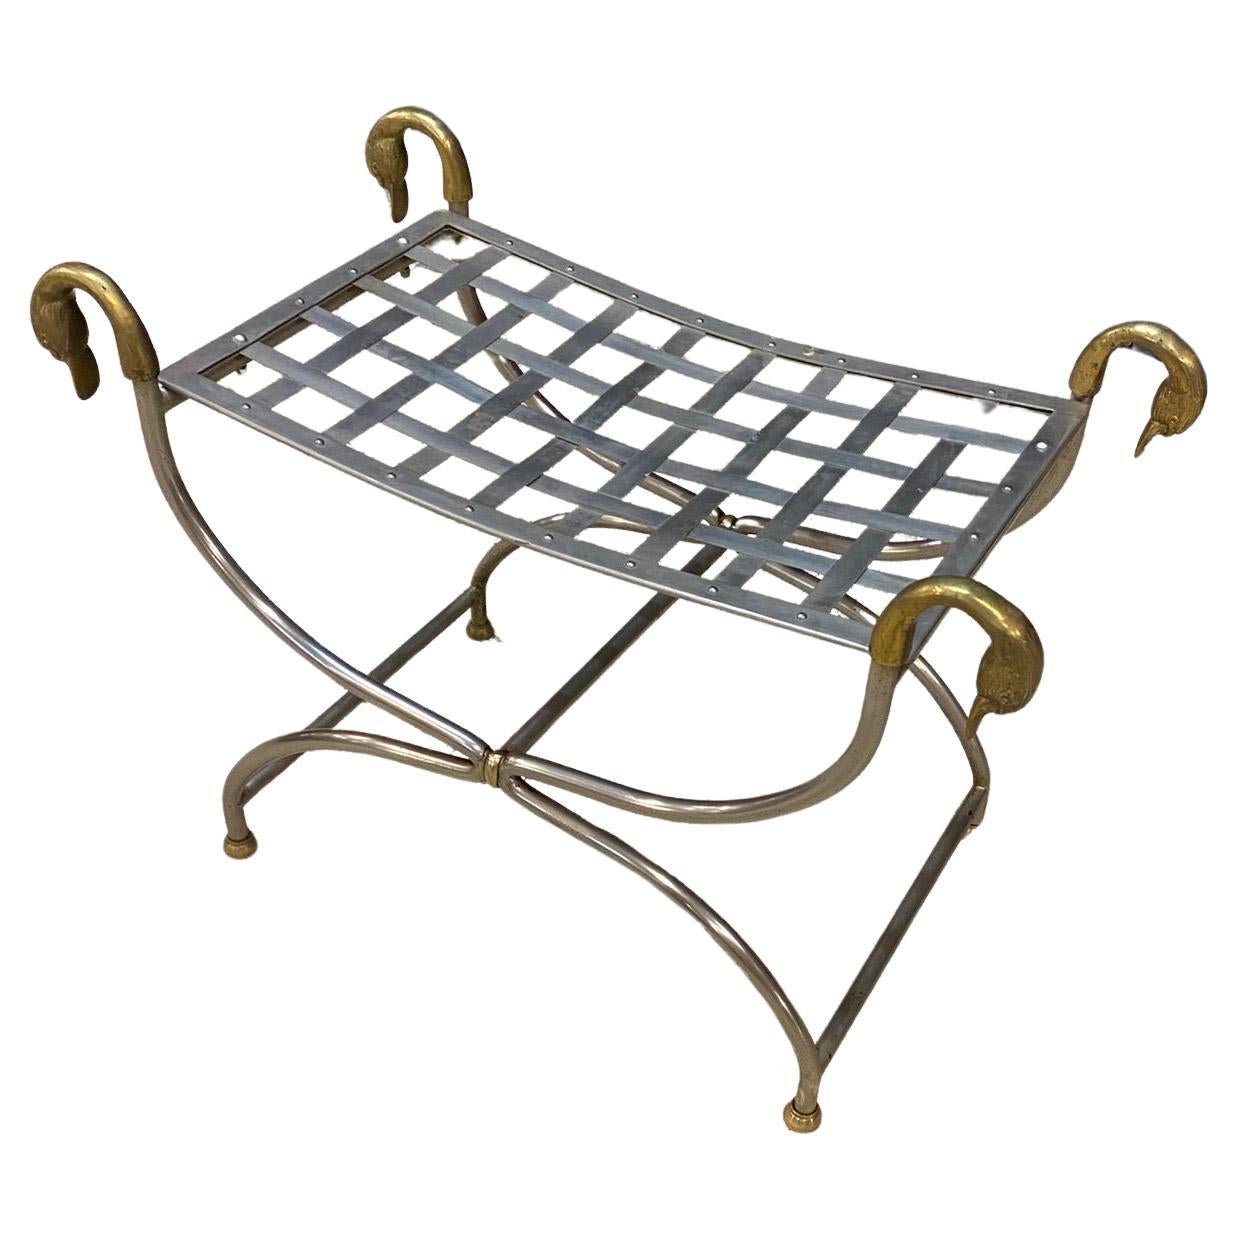 Maison Jansen, Curulle Stool in Steel and Brass, circa 1950/1960 For Sale